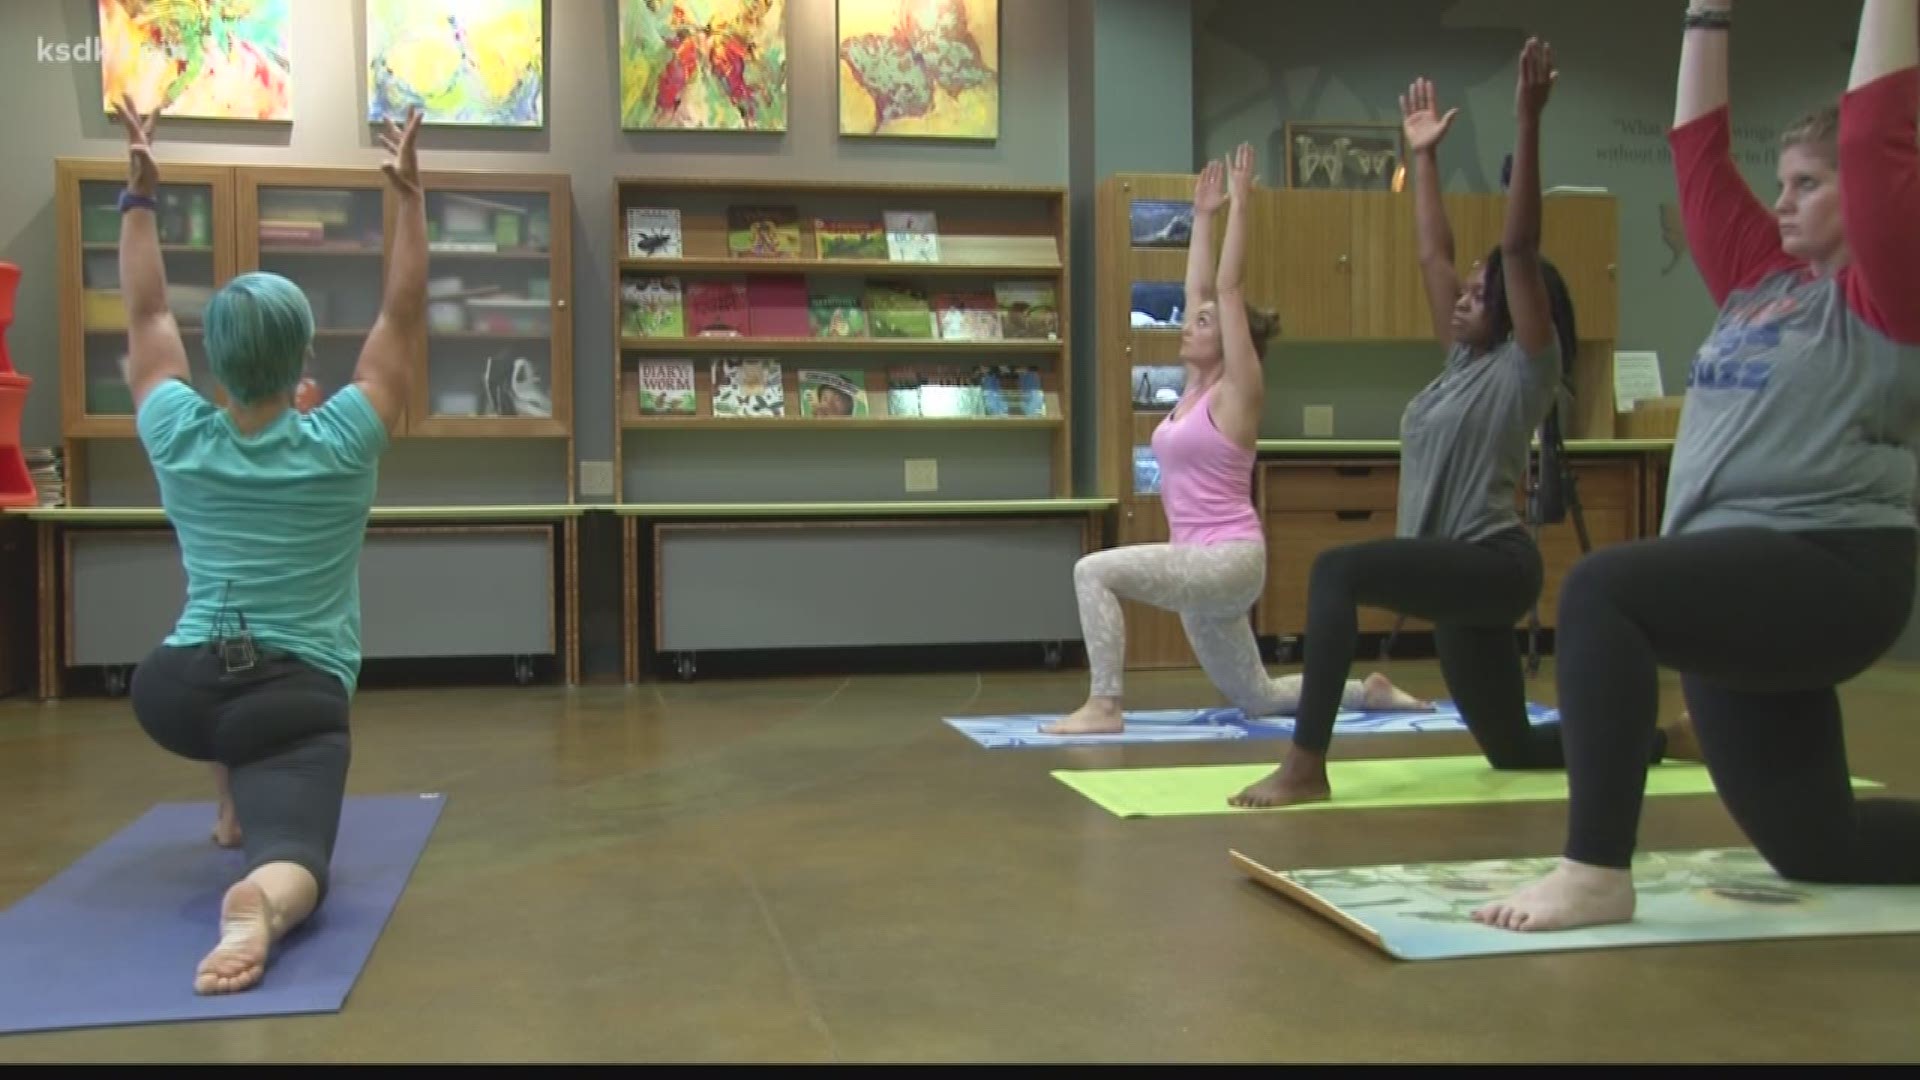 Butterfly House Yoga takes place on the second Tuesday of every month.